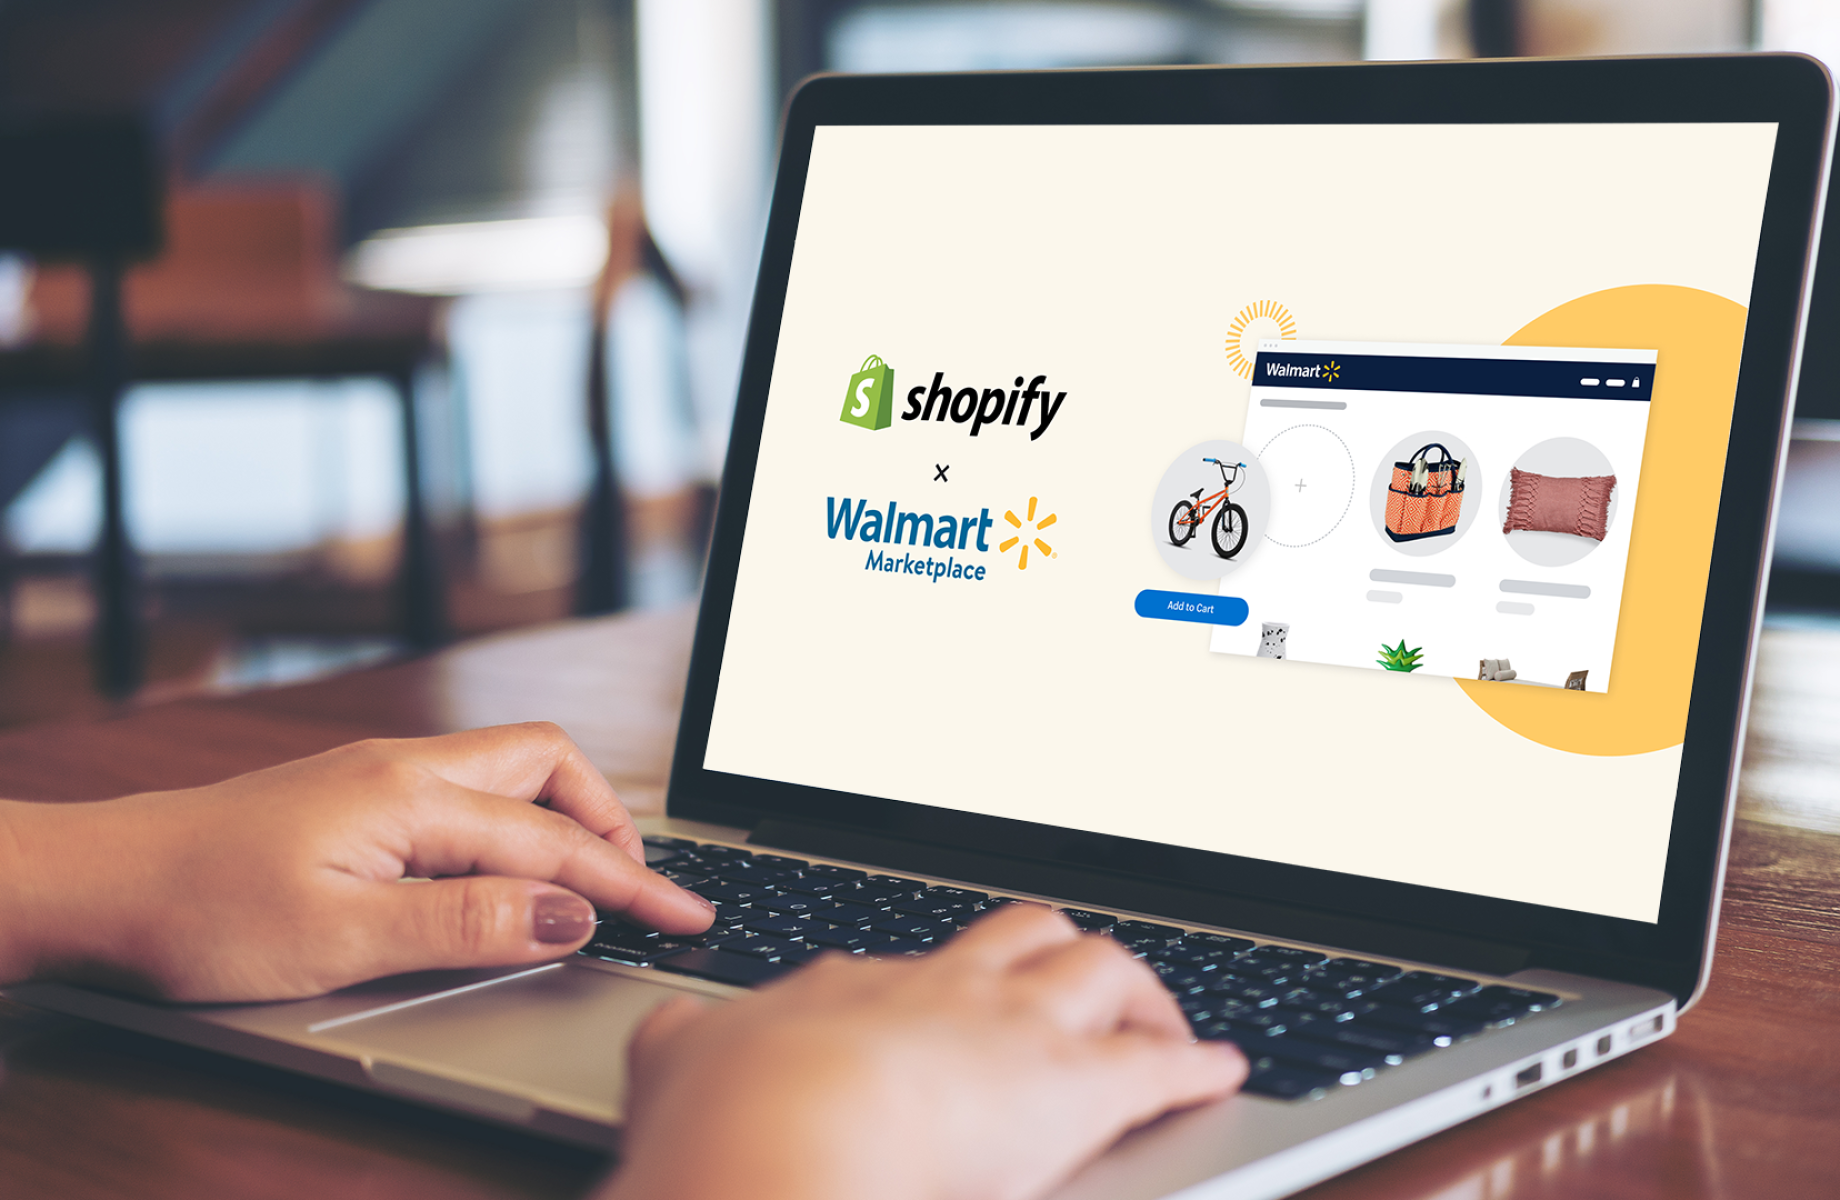 Walmart partners with Shopify to expand its online marketplace | TechCrunch